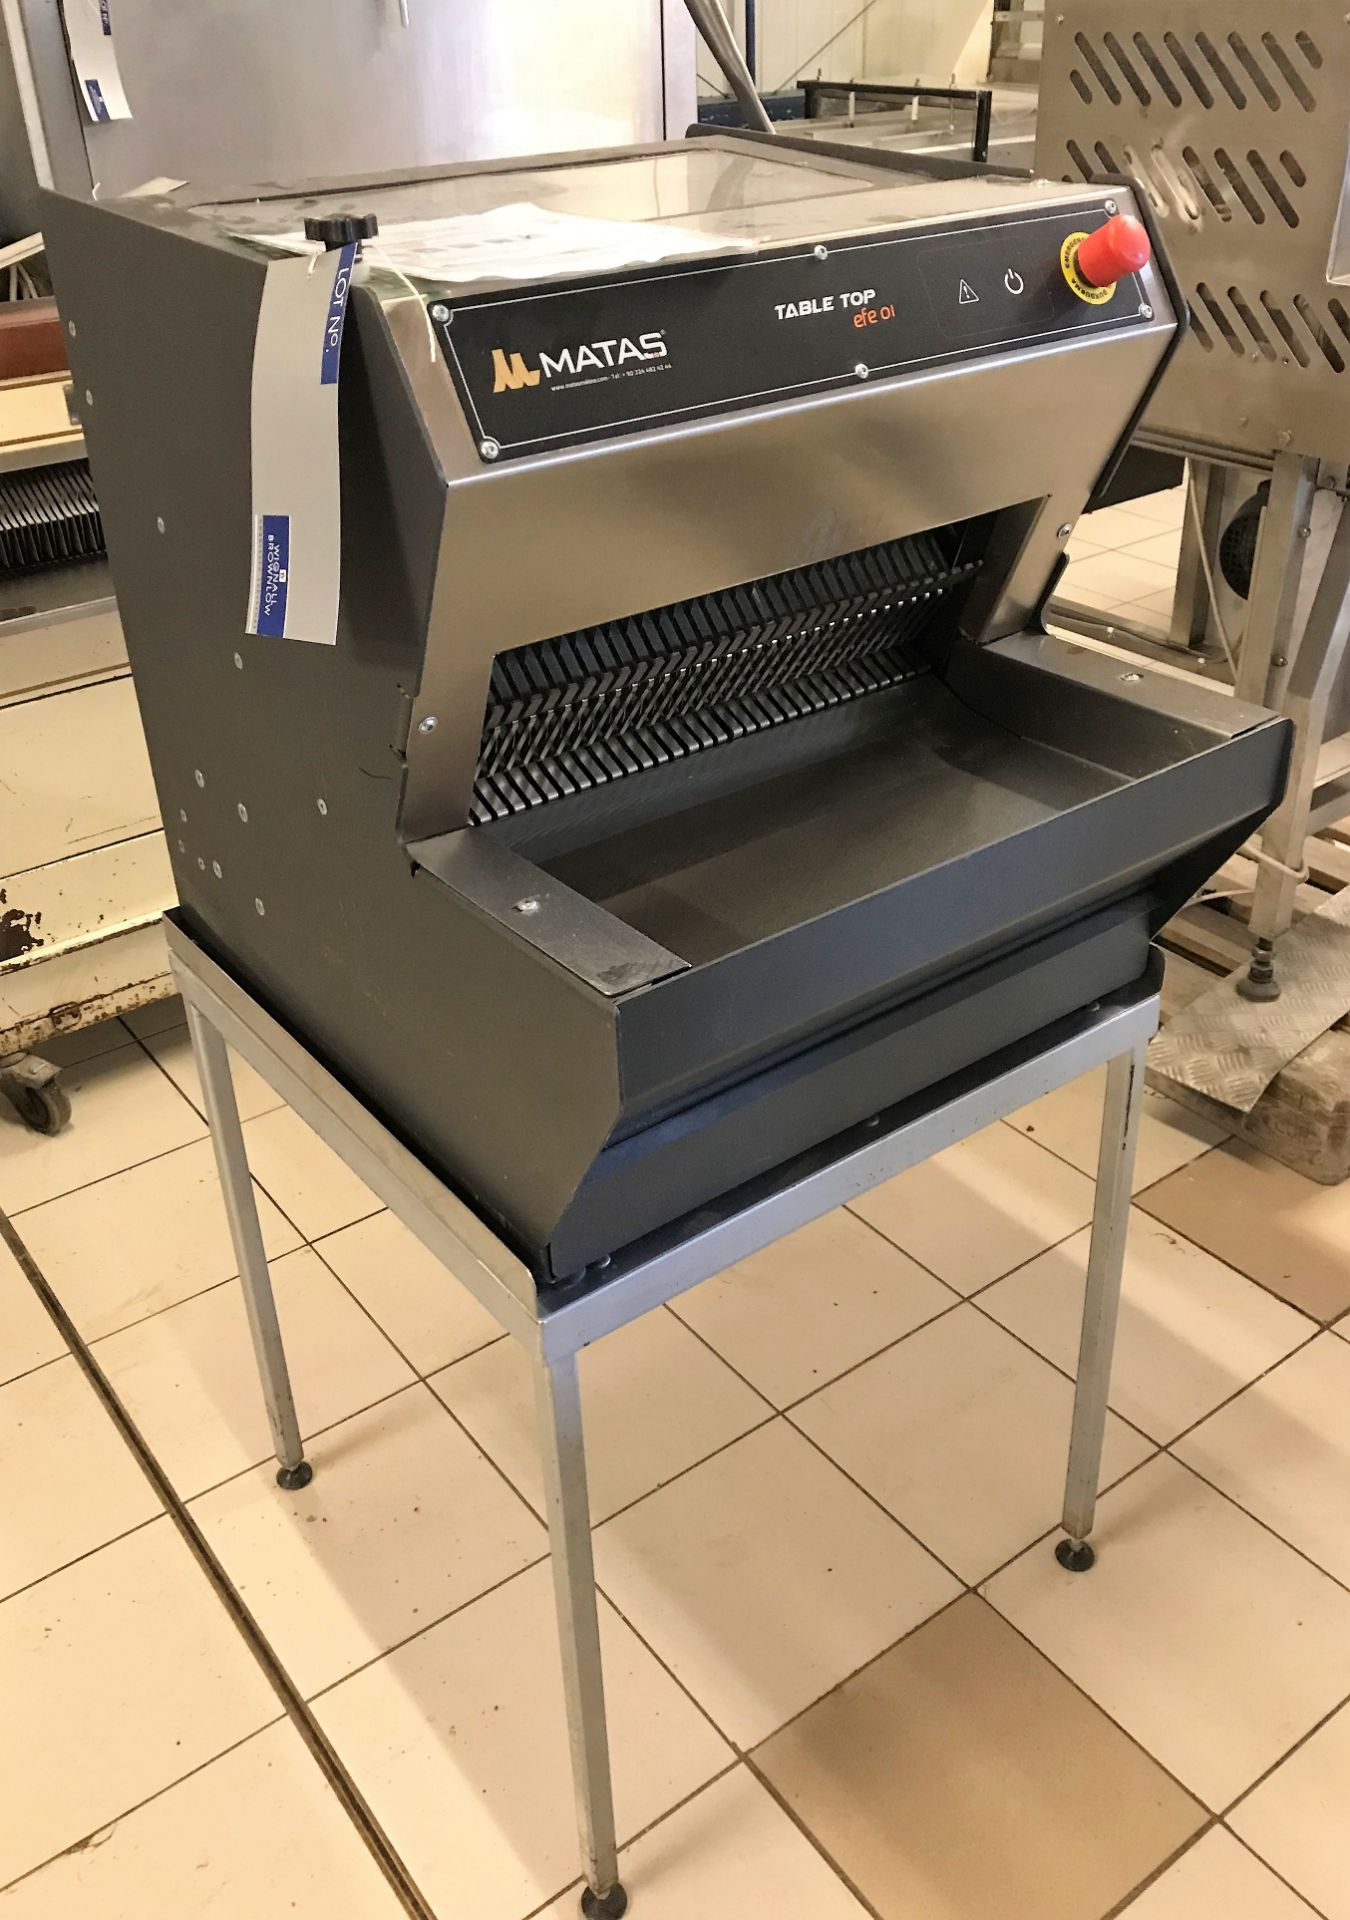 A Matas TABLE TOP efe 01 Sleeved Bread Slicing Machine and Stand No.17681 (12/2017), 1ph, 480mm w.